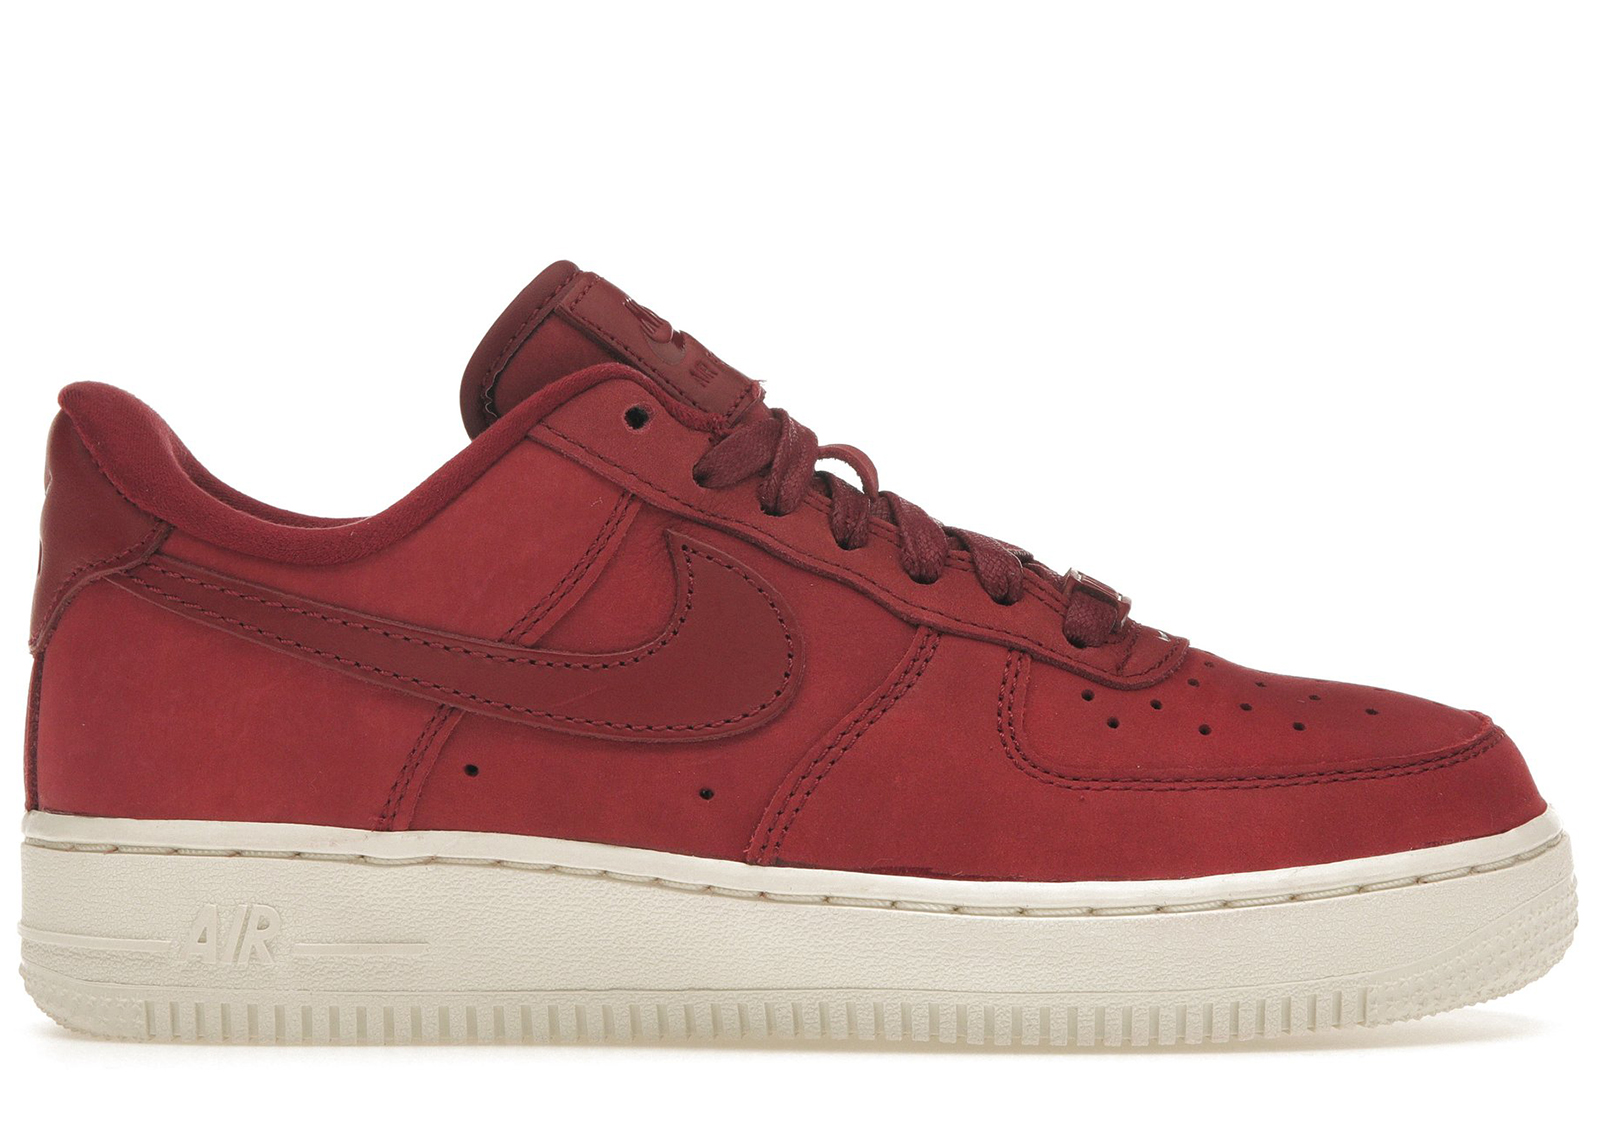 Nike Air Force 1 Low '07 PRM Team Red Sail (Women's) - DR9503-600 - US